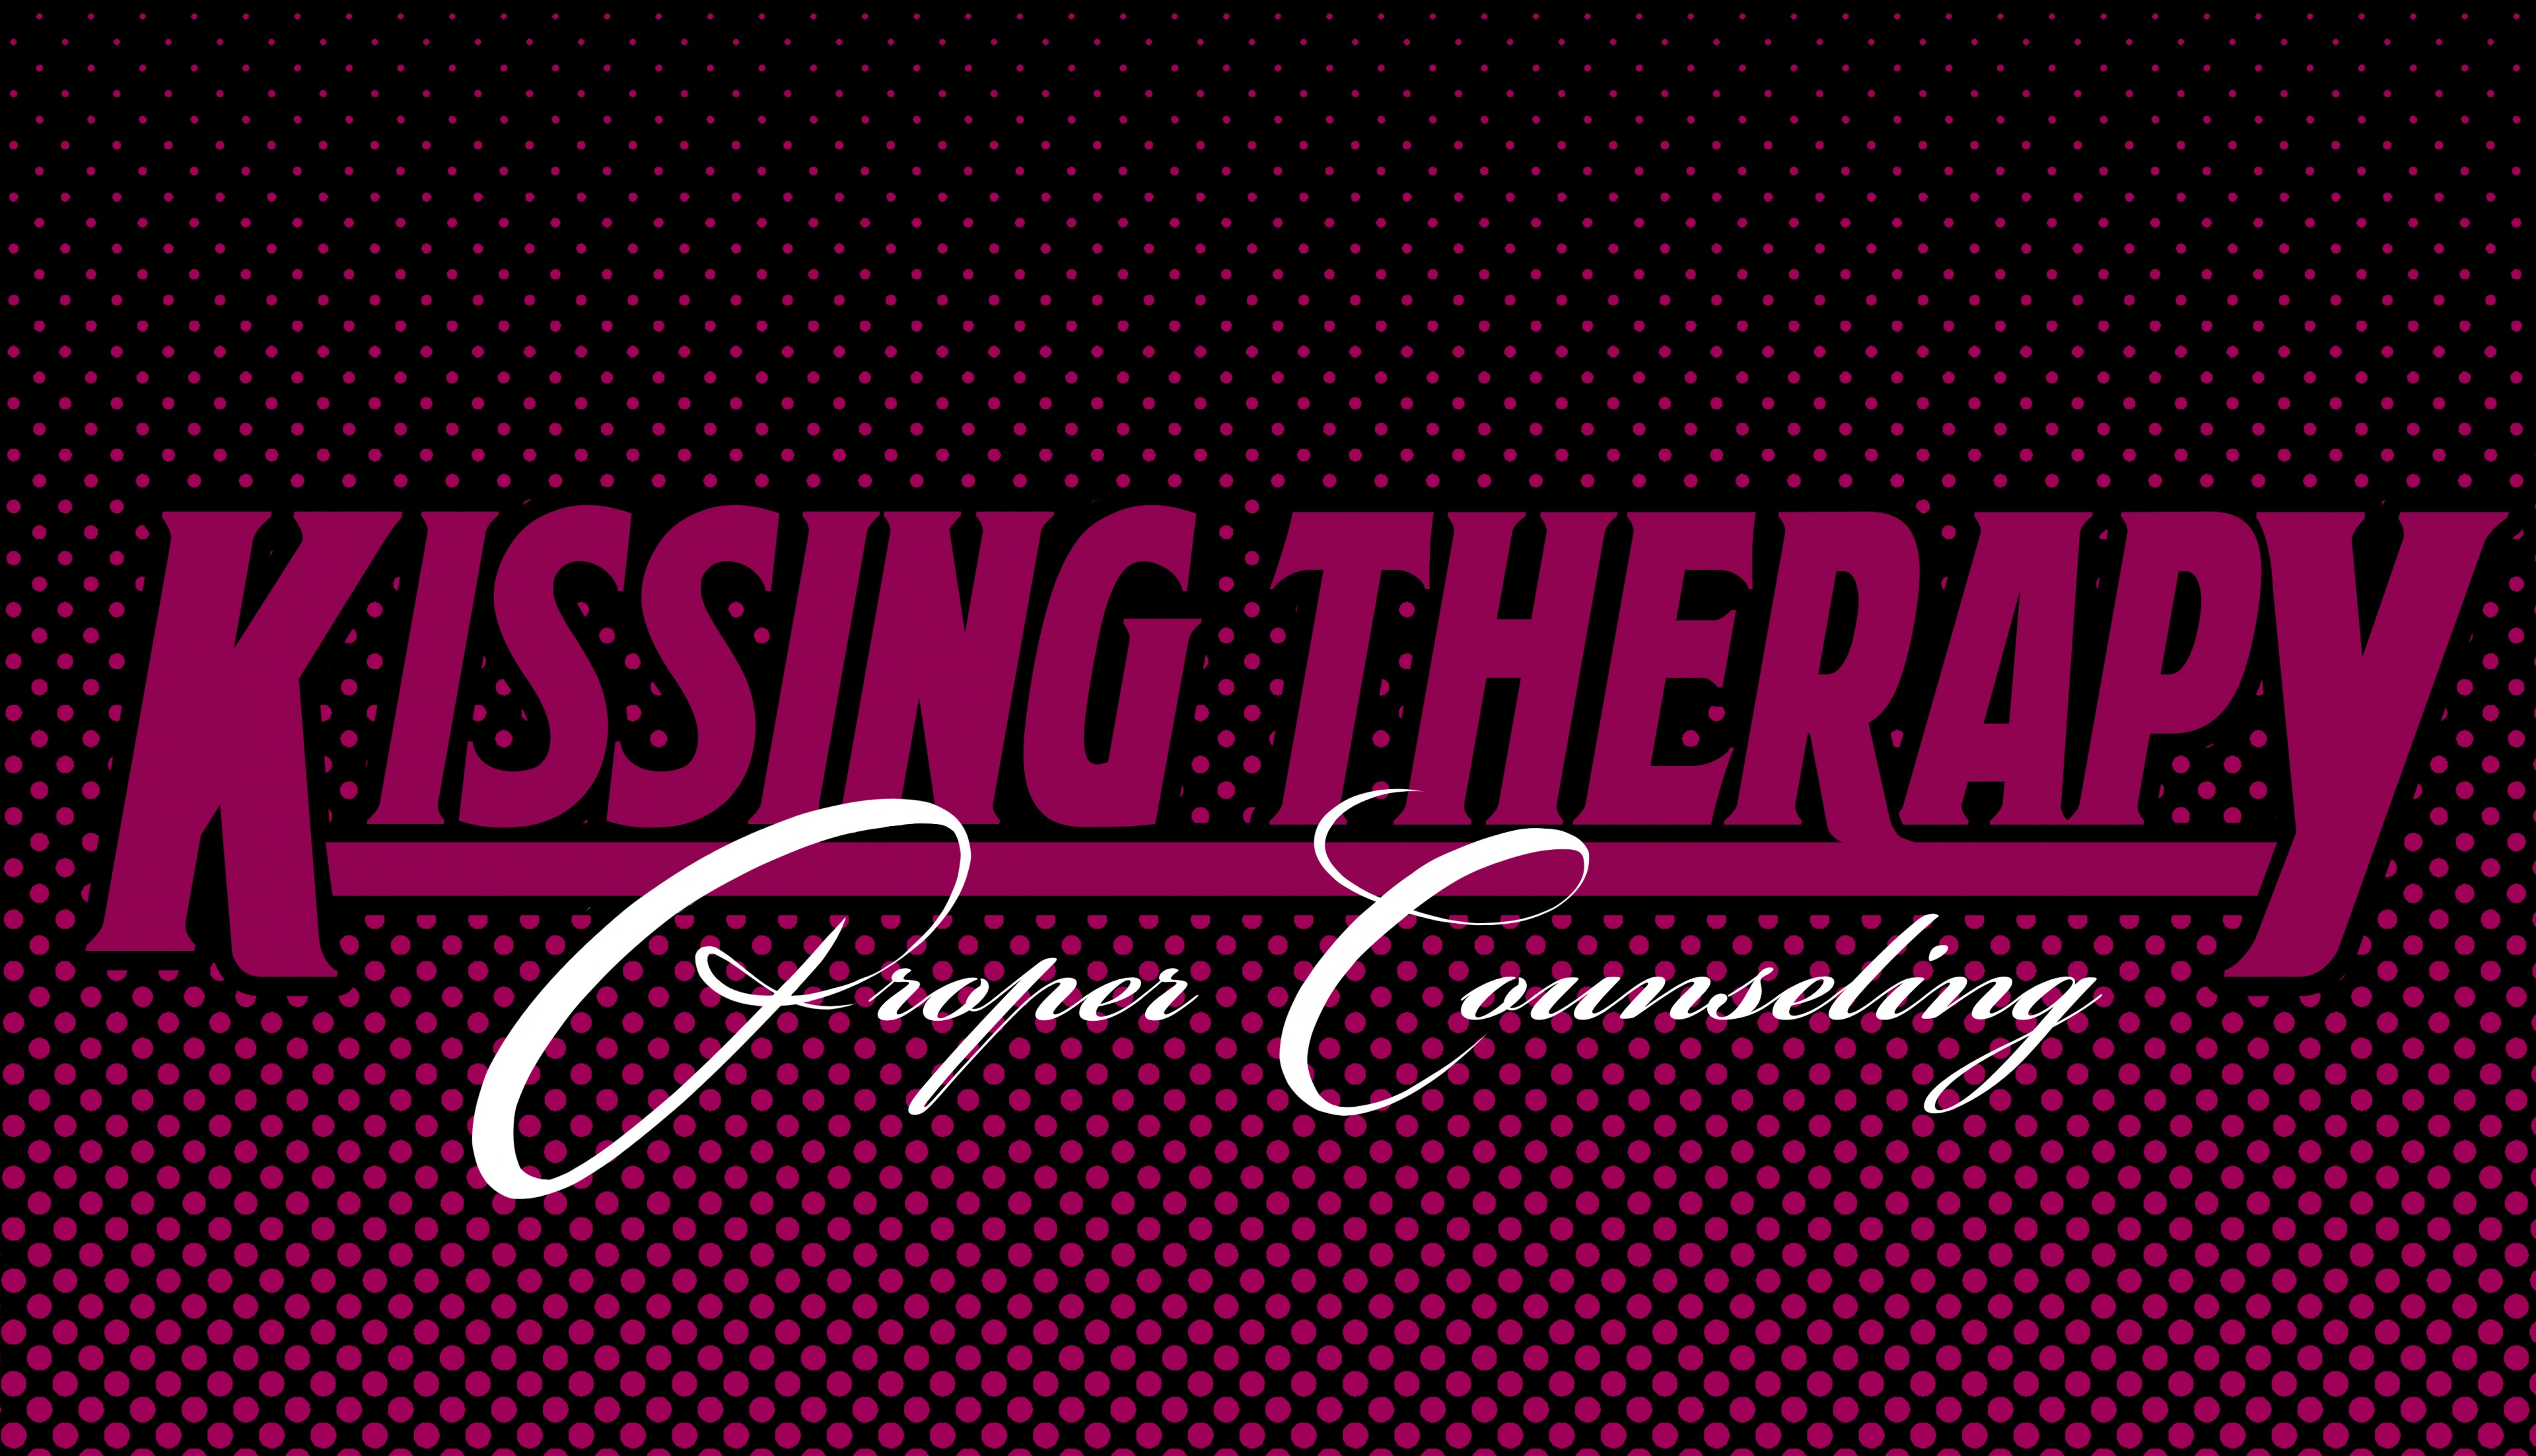 Kissing Therapy Proper Counseling [v1.019] main image